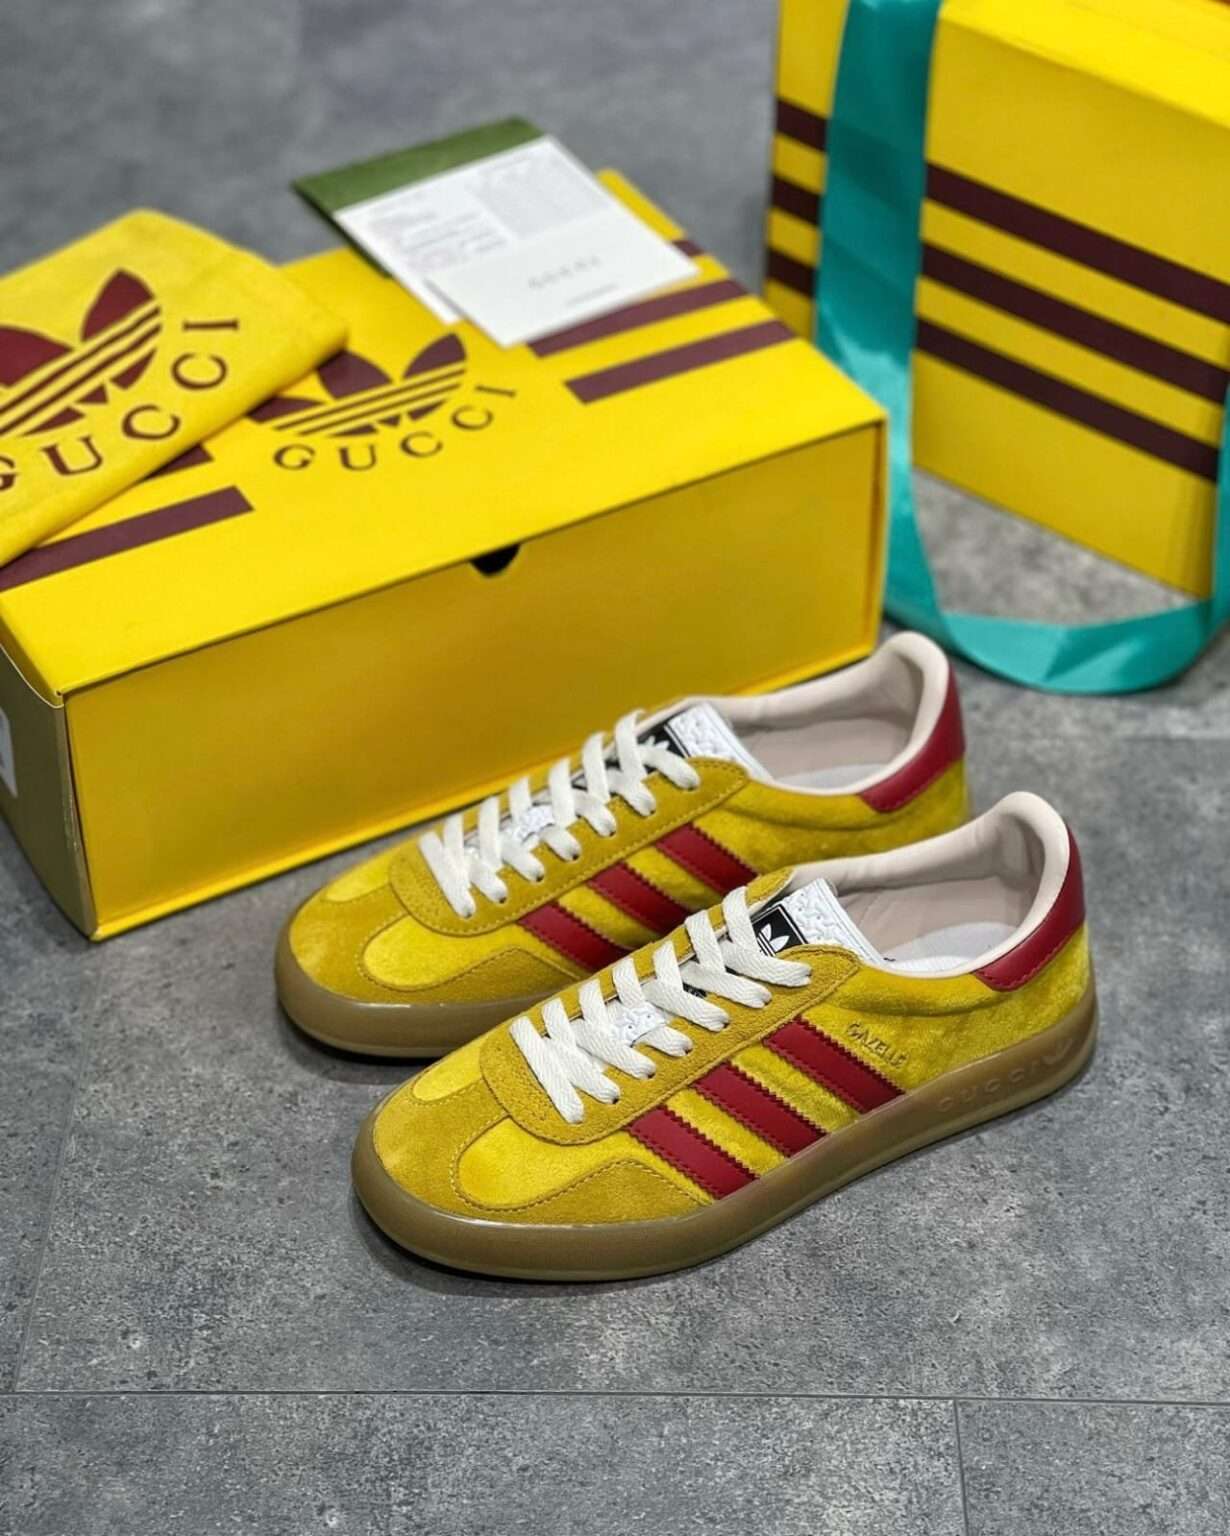 Buy First Copy Adidas X Gucci Gazelle Yellow Shoes Online India